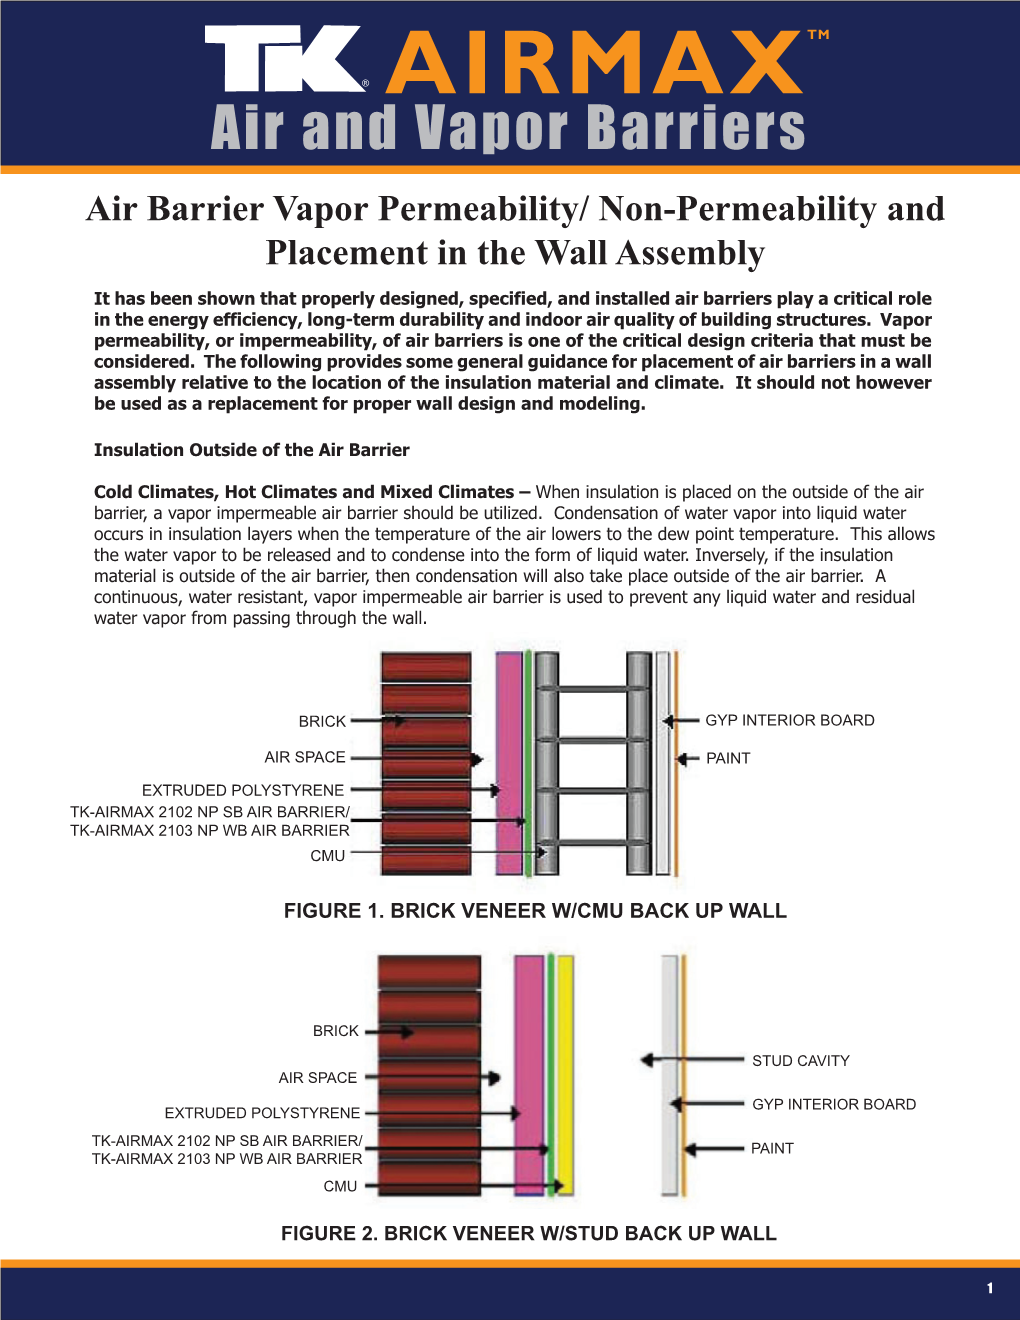 Air Barrier Product Placement & Selection1